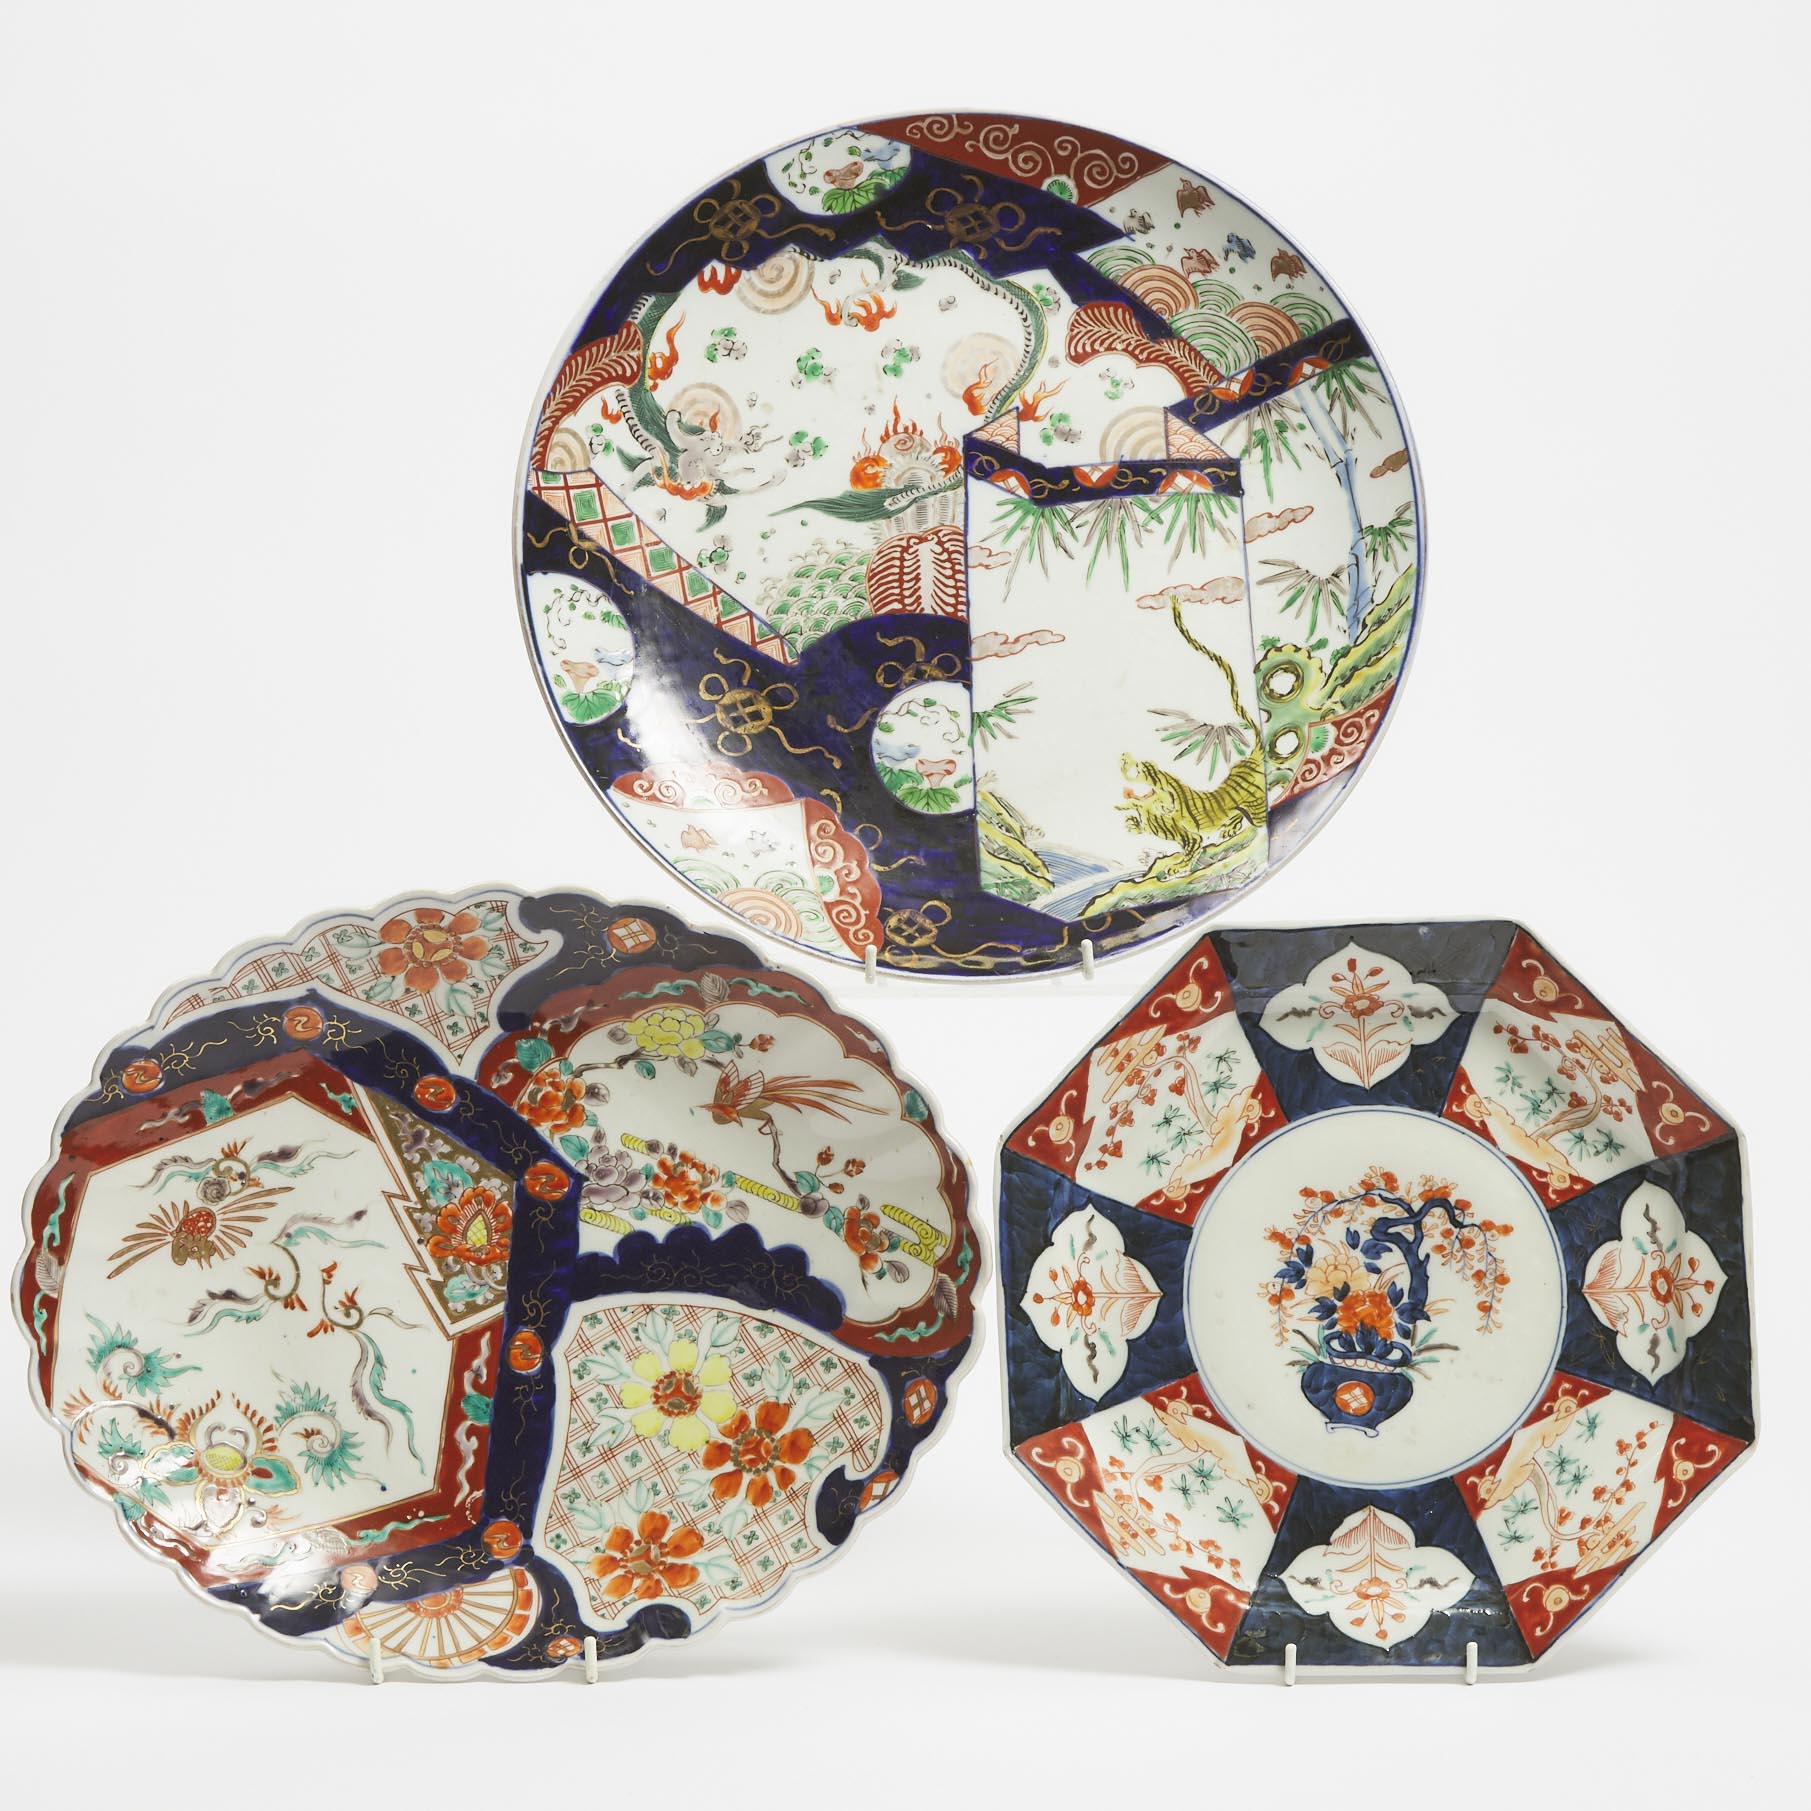 A Group of Three Imari Chargers, Meiji Period